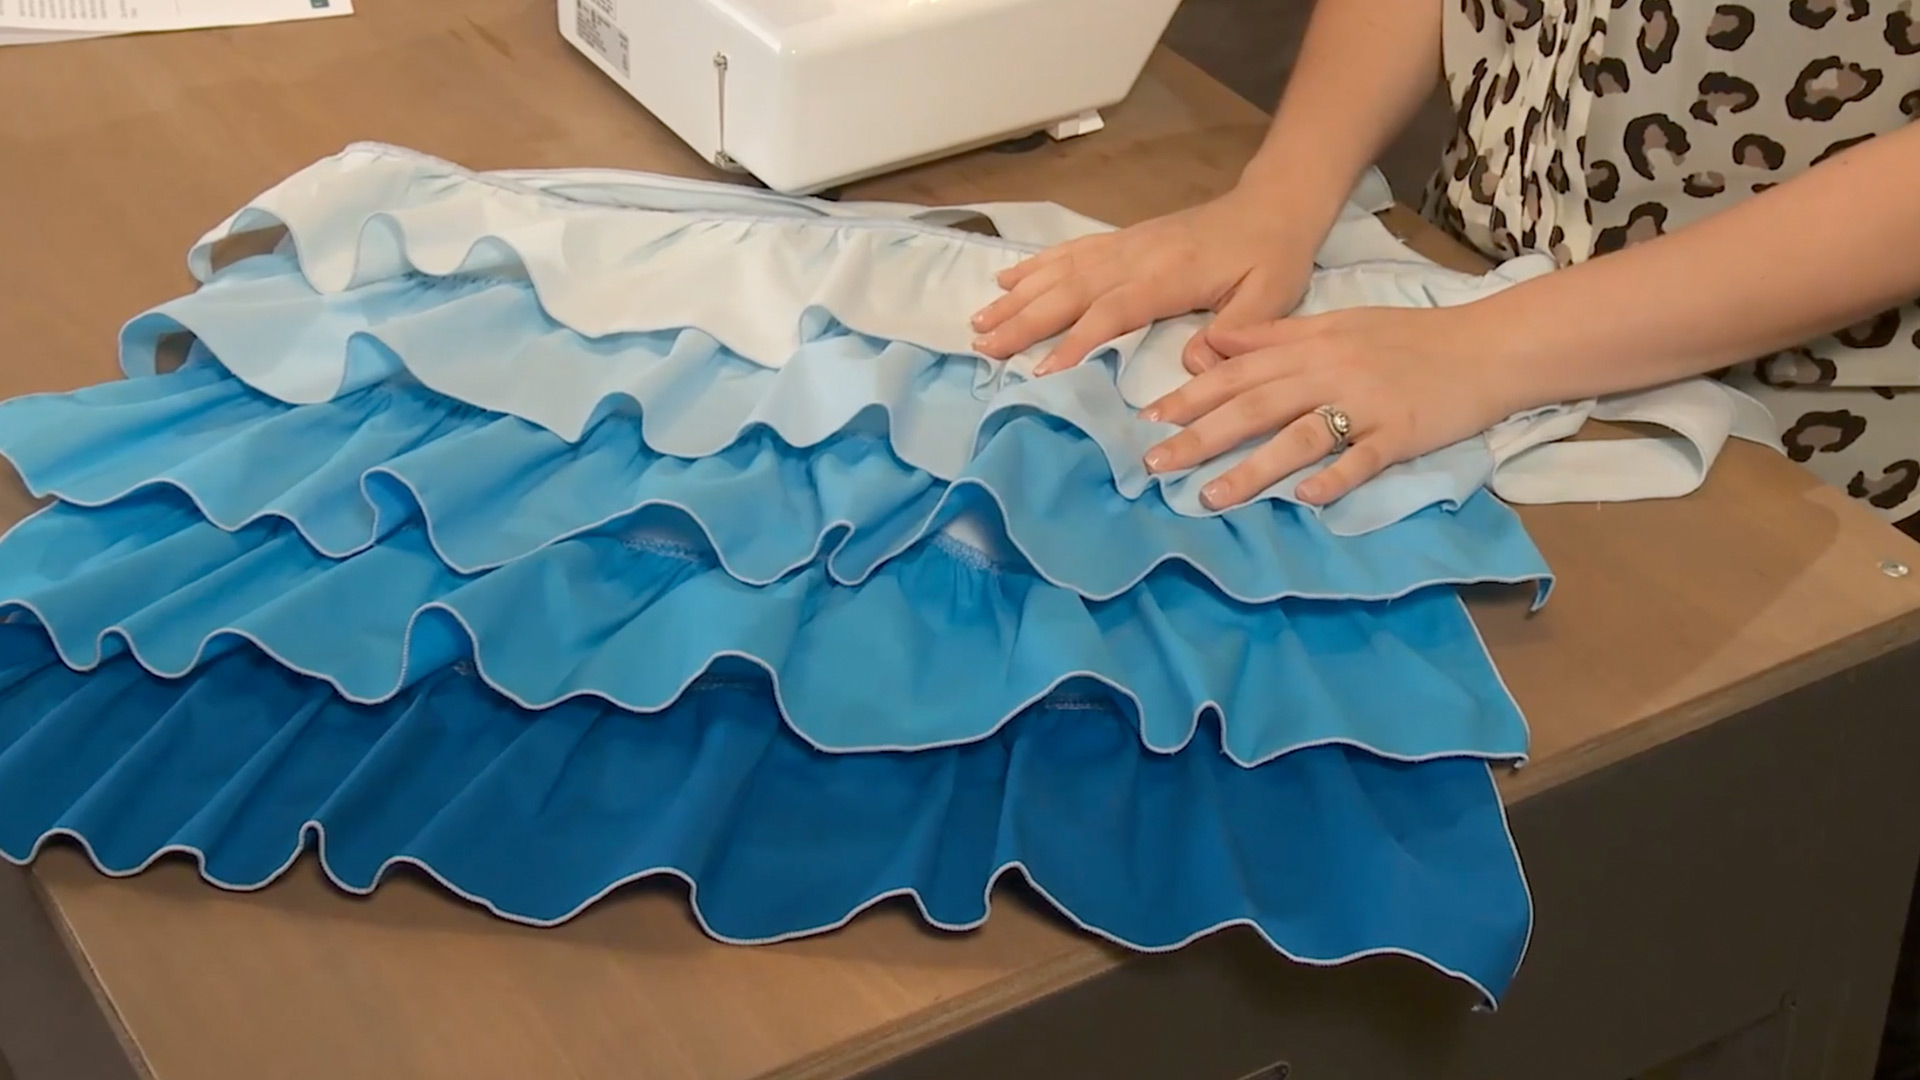 Serger Ombré Ruffled Apron | Amy Alanarticle featured image thumbnail.